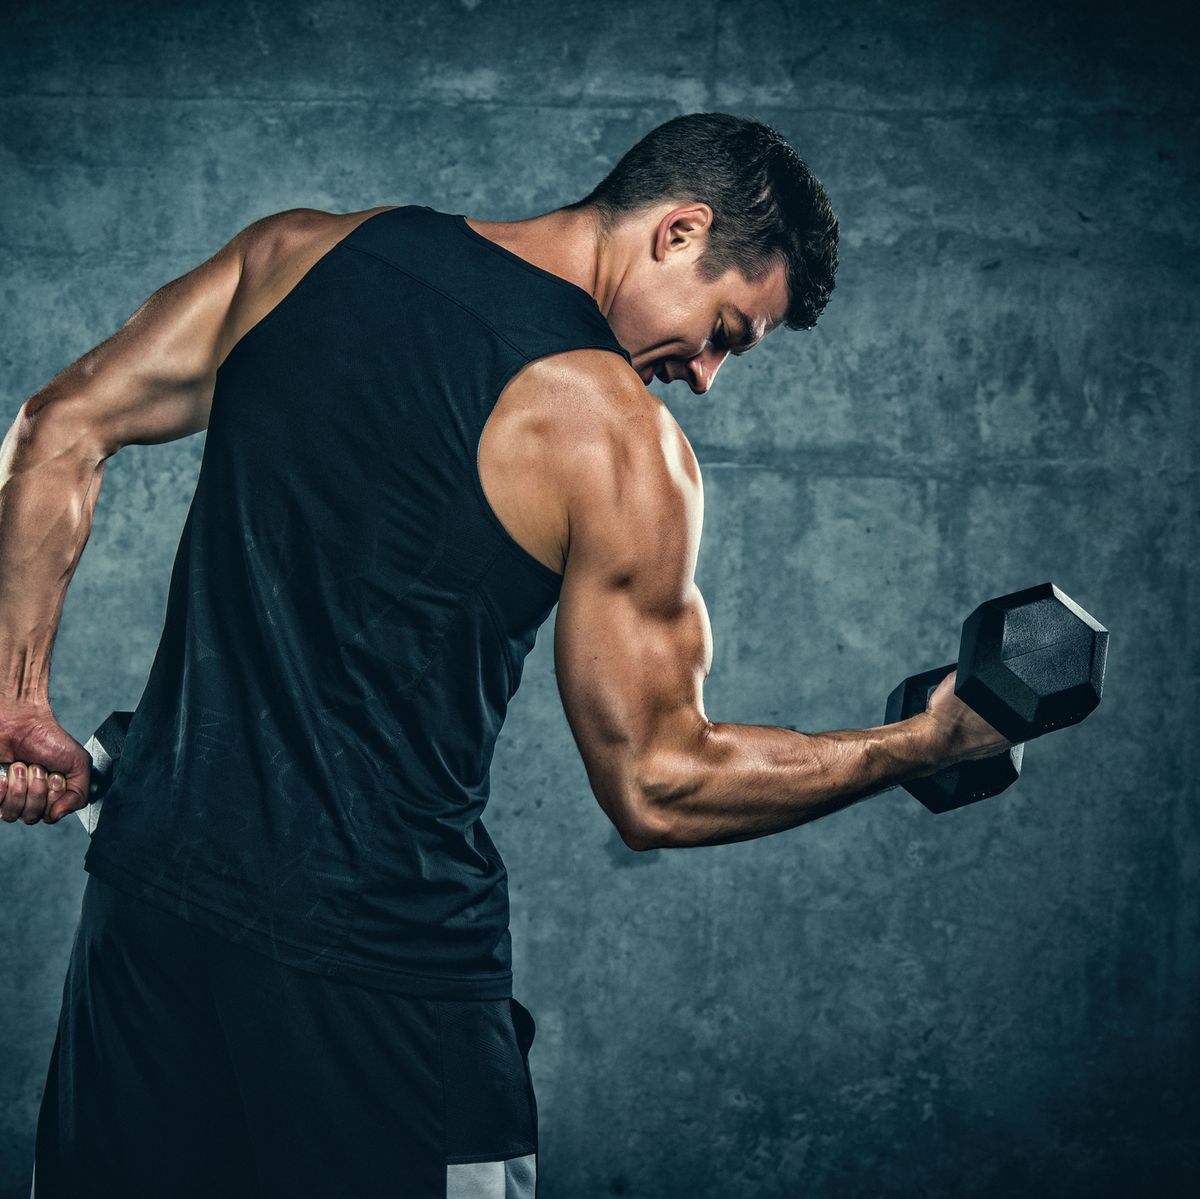 One Dumbbell, Two Muscular Arms - Muscle & Fitness